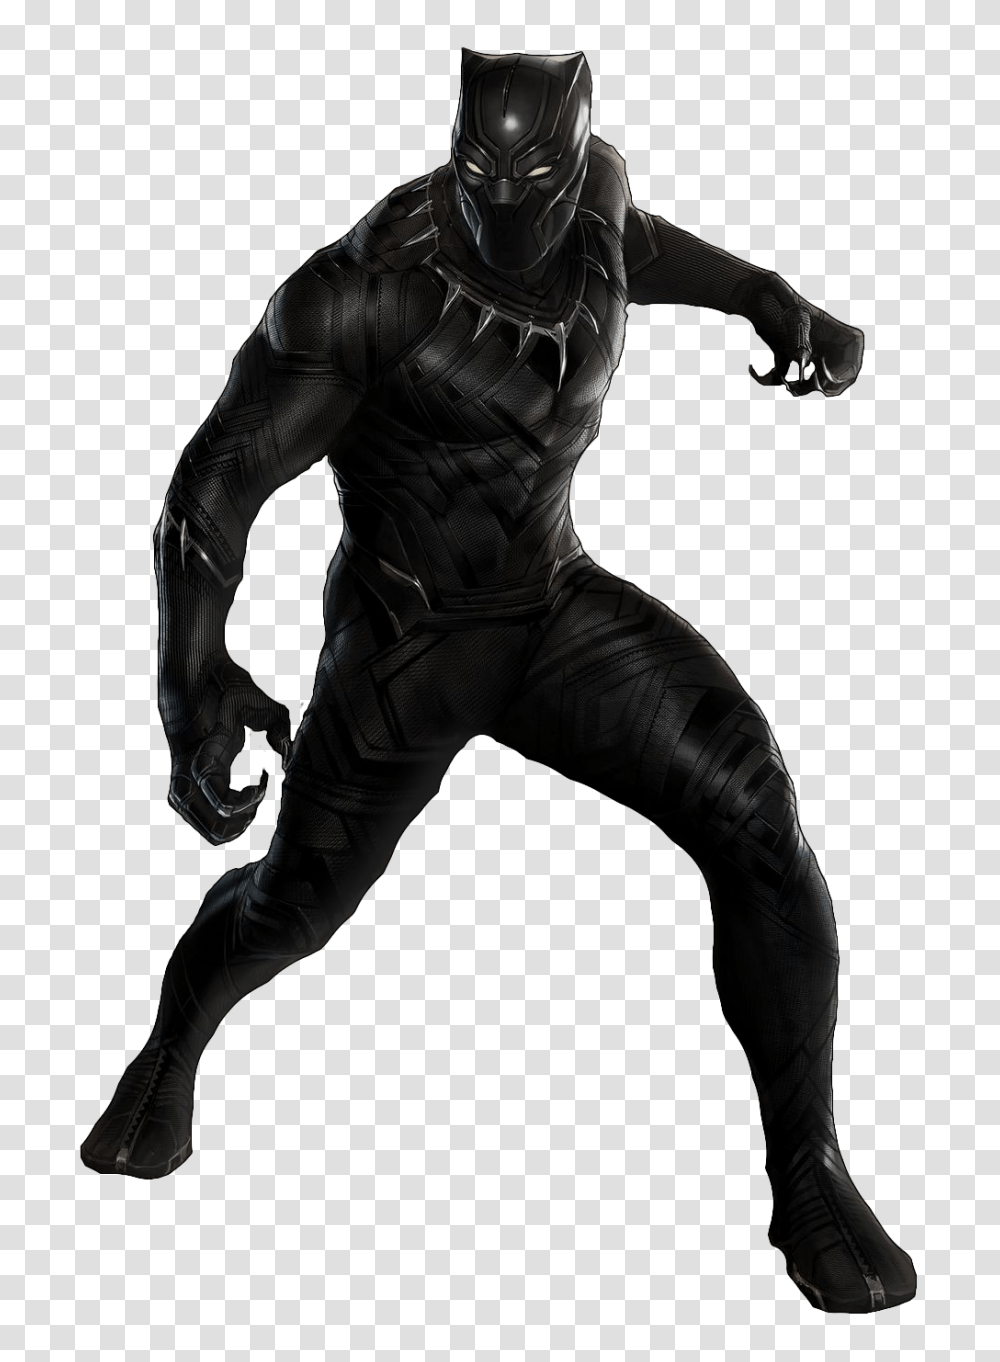 Batman Or Iron Man Which Hero Is Better, Ninja, Person, Alien, Dance Pose Transparent Png